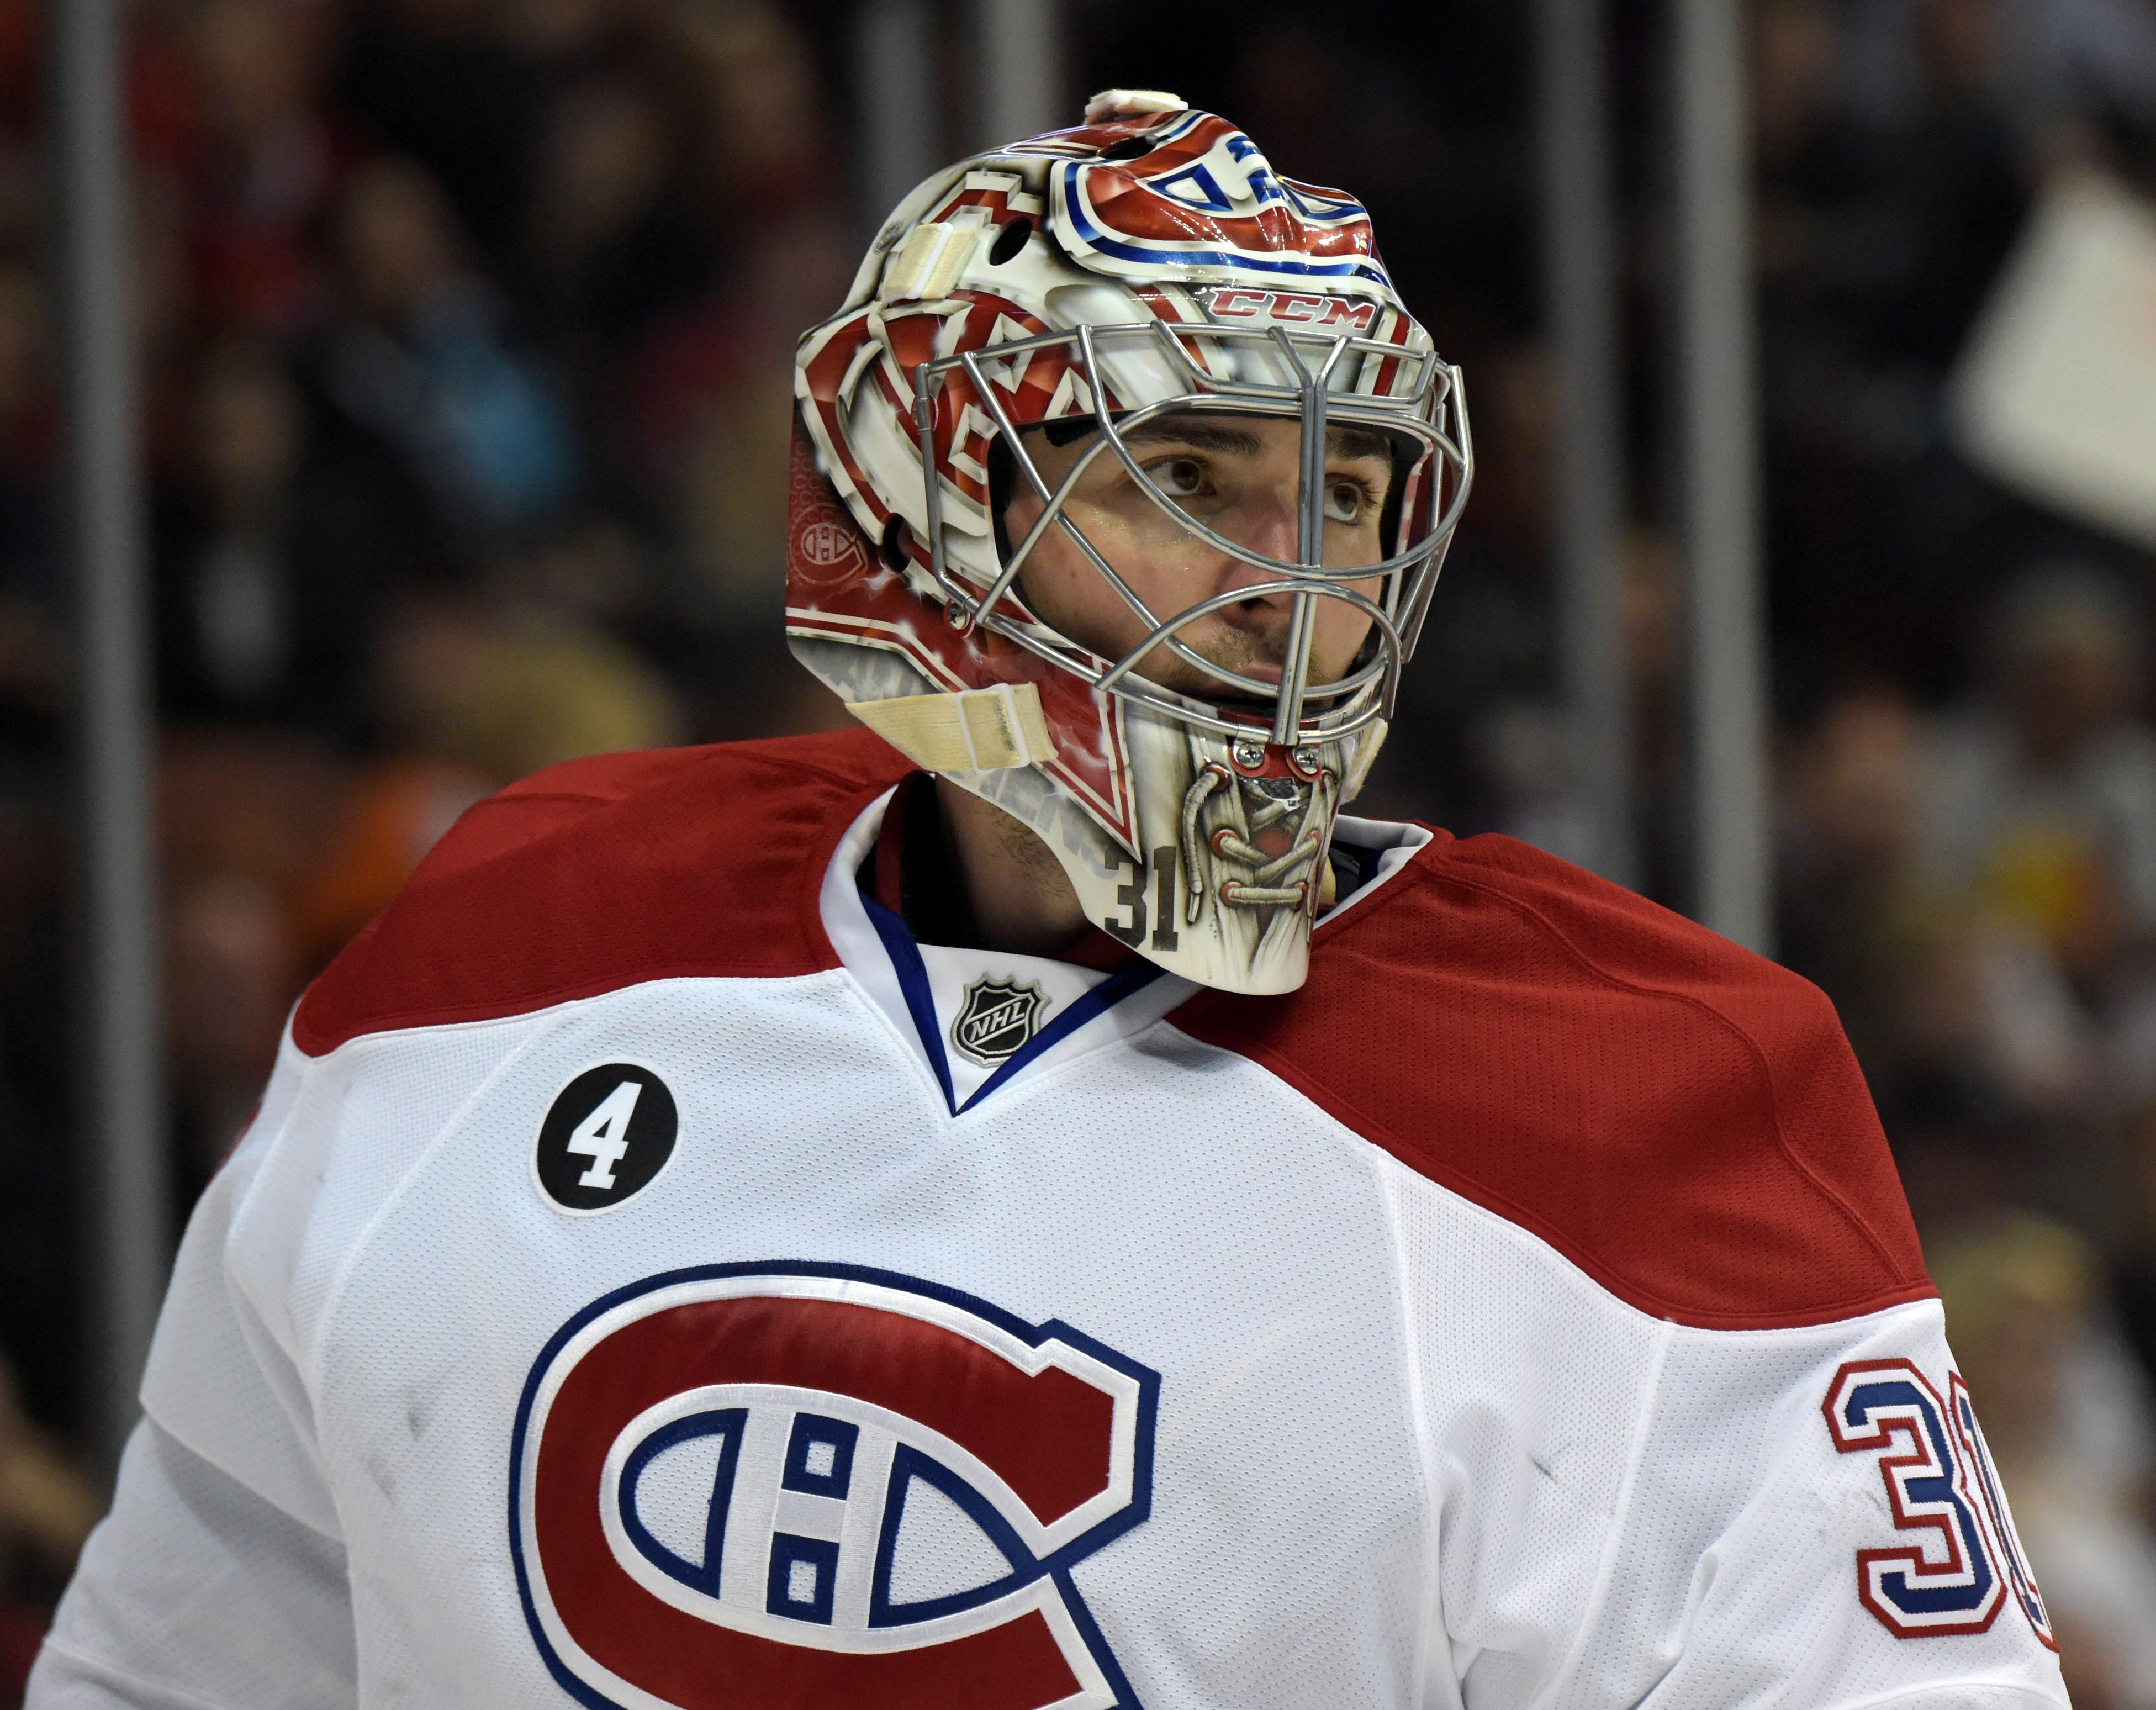 Carey Price has the Montreal Canadiens in the Presidents' Trophy hunt. (Kirby Lee, USA TODAY Sports)